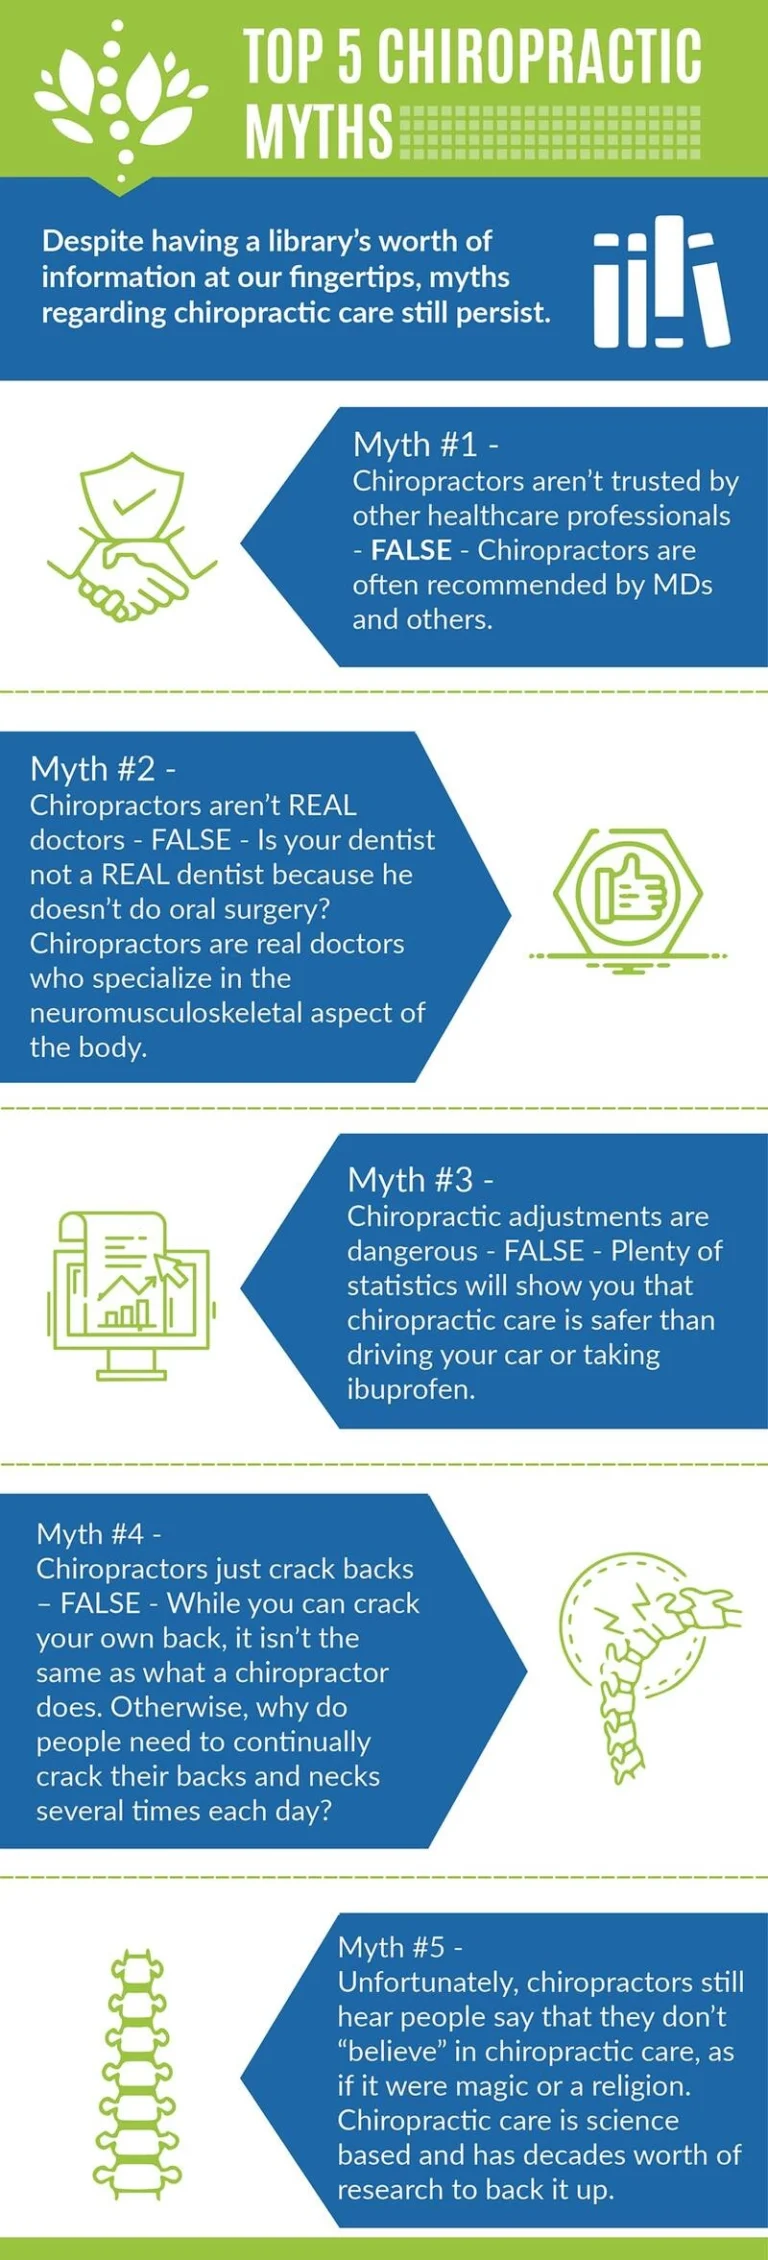 An infographic about the top 5 chiropractic myths.